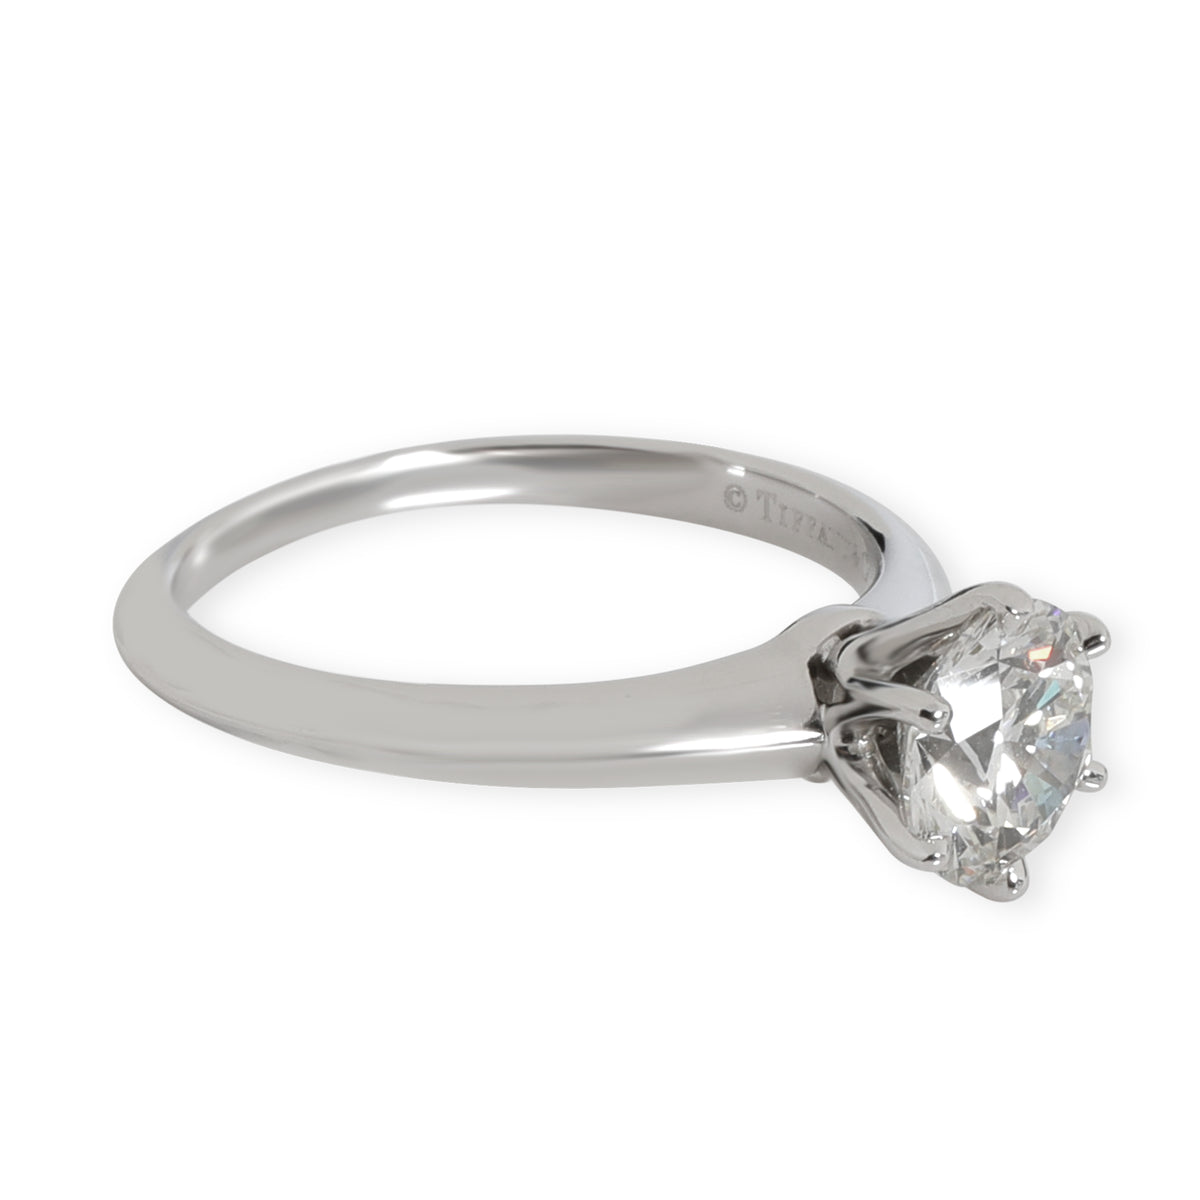 Tiffany & Co. Diamond Solitaire Engagement Ring in Platinum G VVS2 1.17 CTW